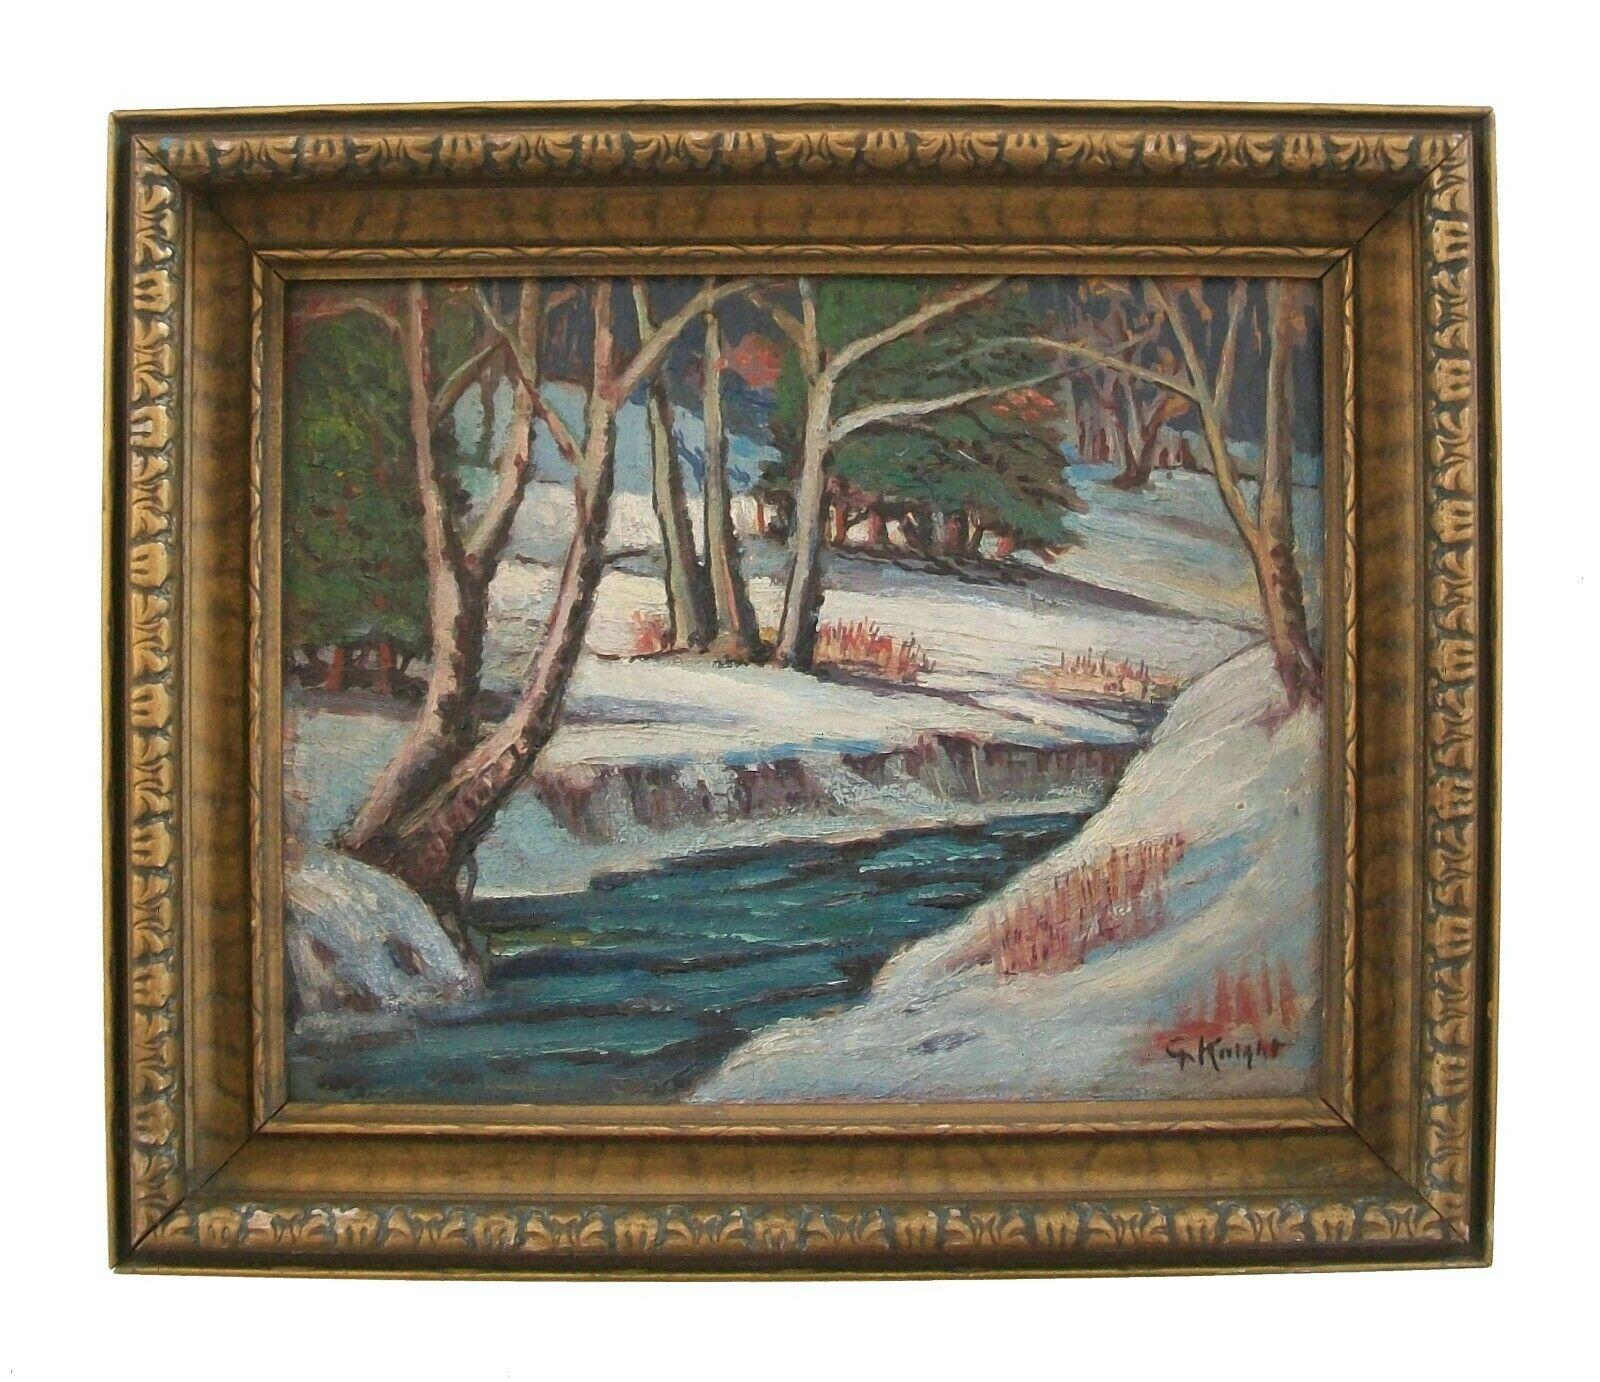 Gwendolyn Knight Lawrence (Attributed - American 1913-2005) - 'Untitled' - Post Impressionist winter landscape oil painting on artist's canvas covered board - original pine frame with gilded finish - signed lower right - United States - circa